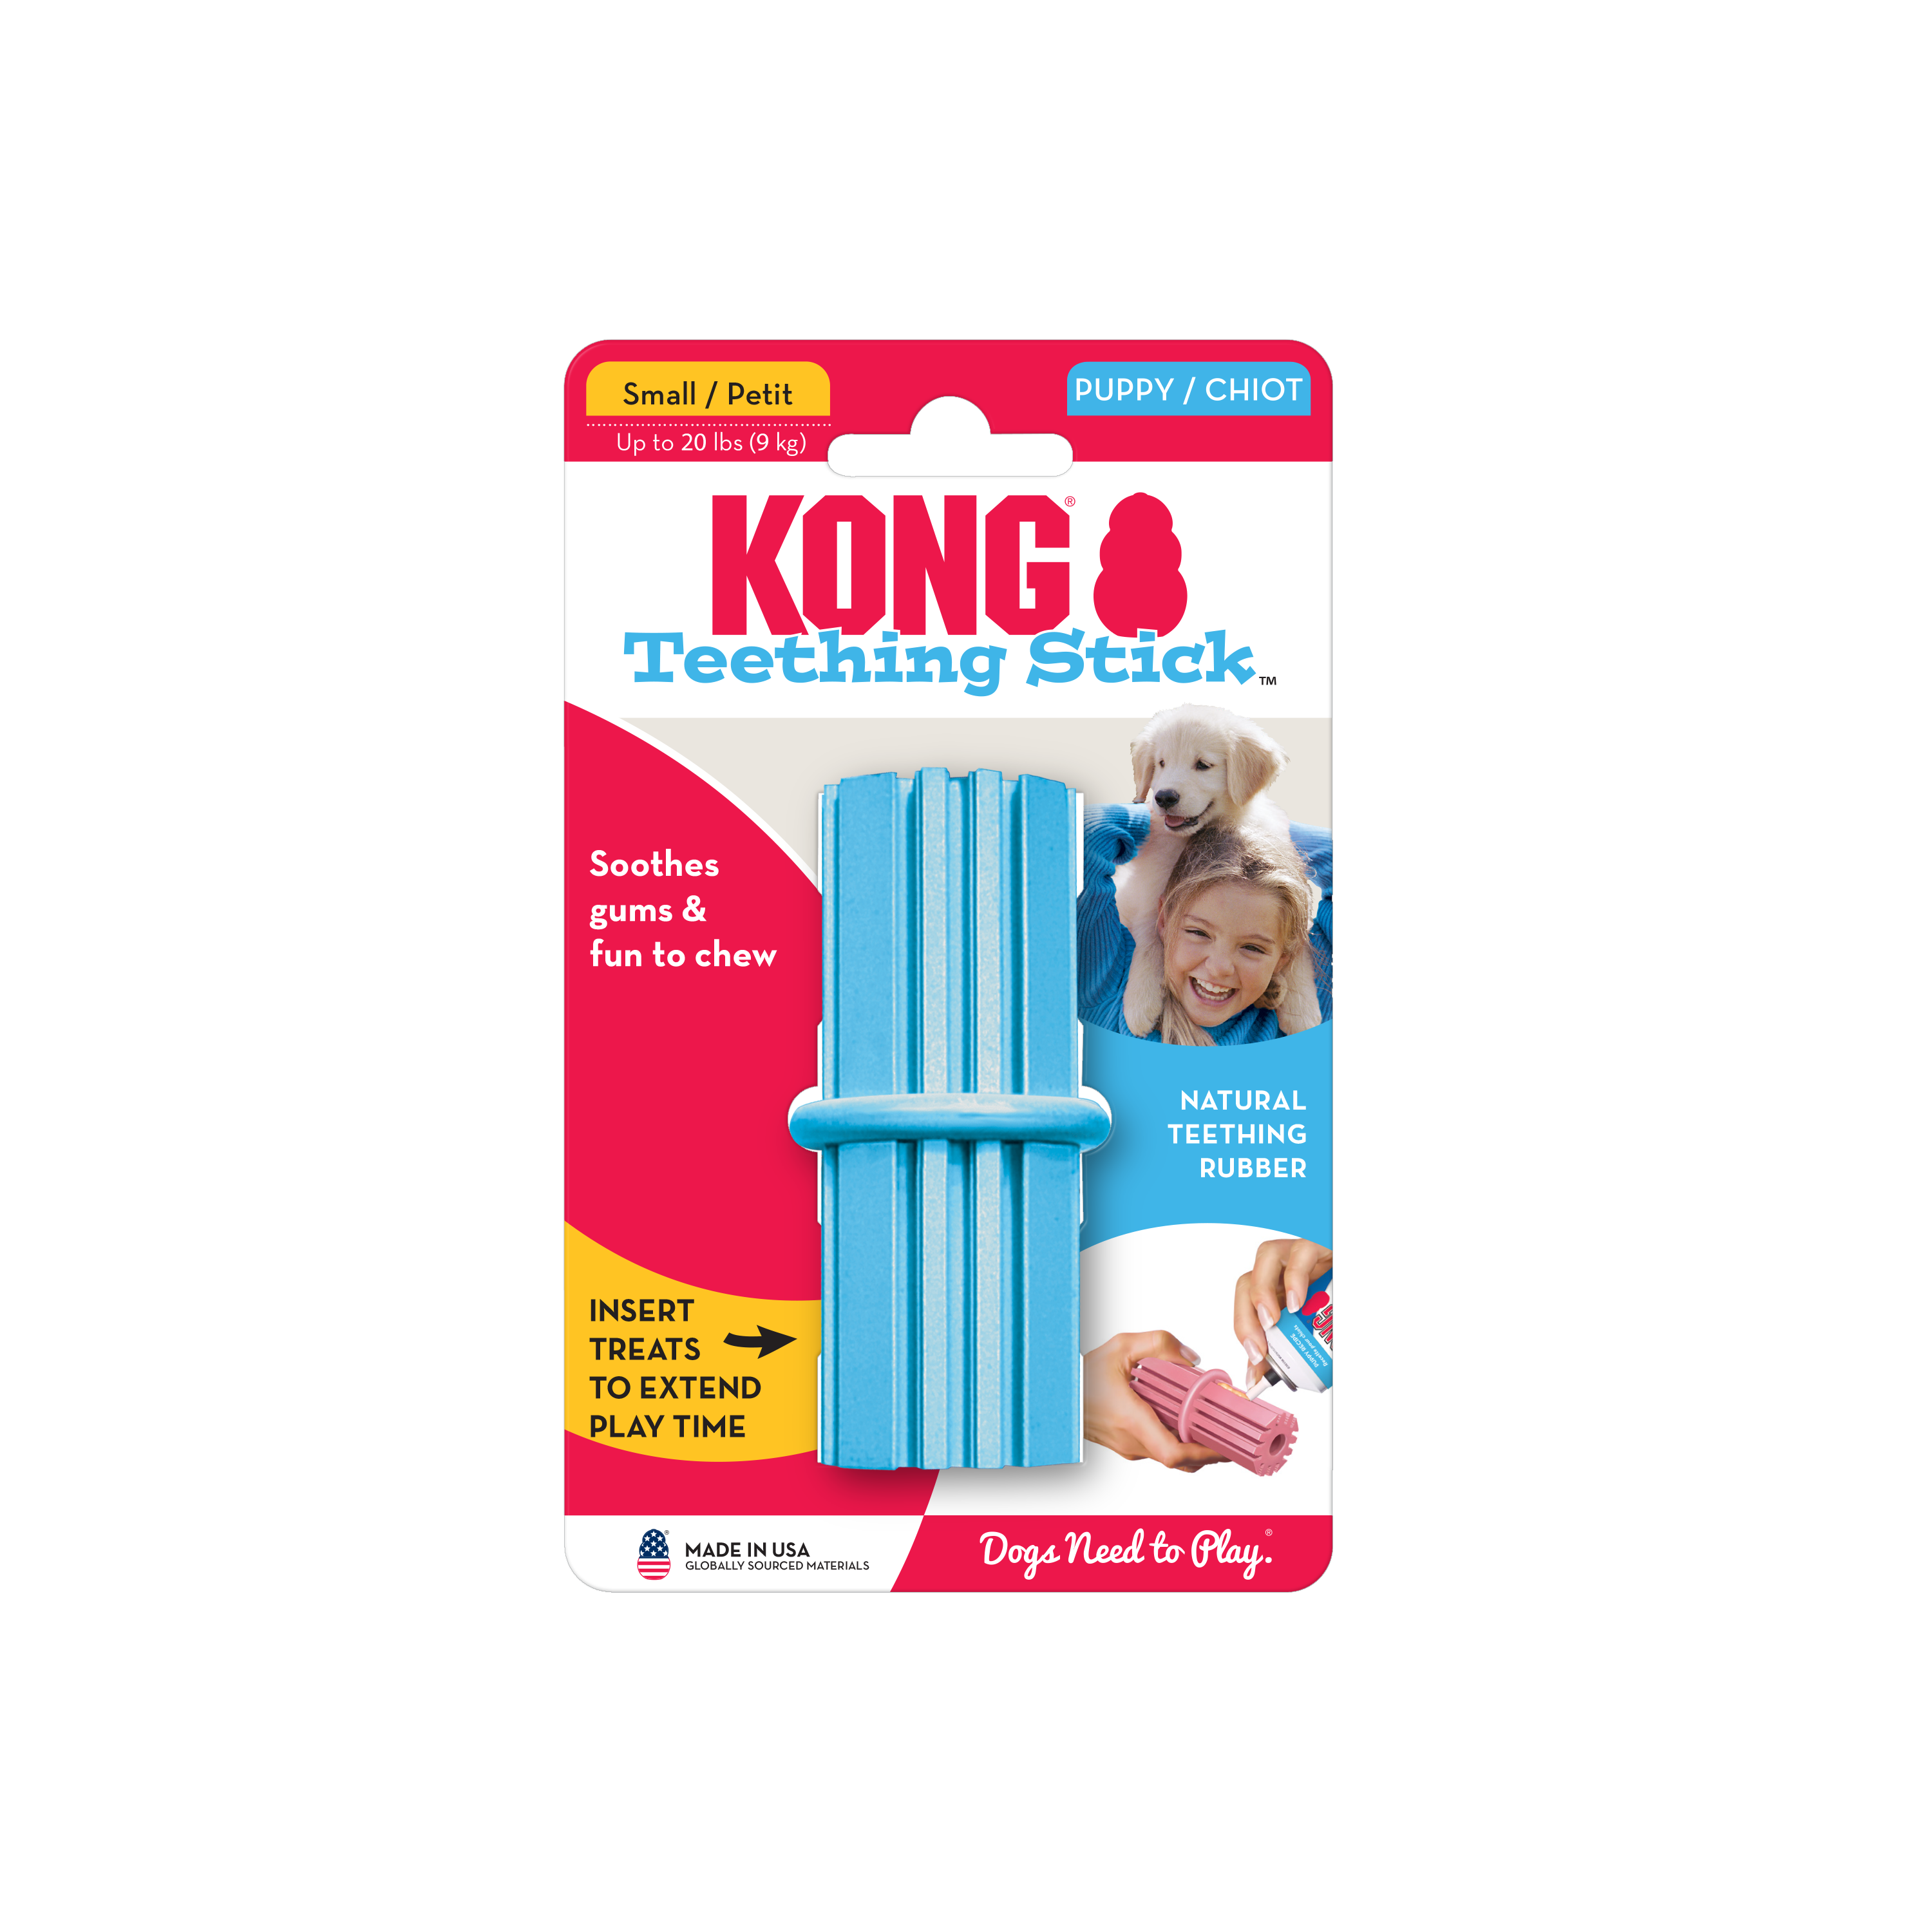 KONG Puppy Teething Stick onpack product image